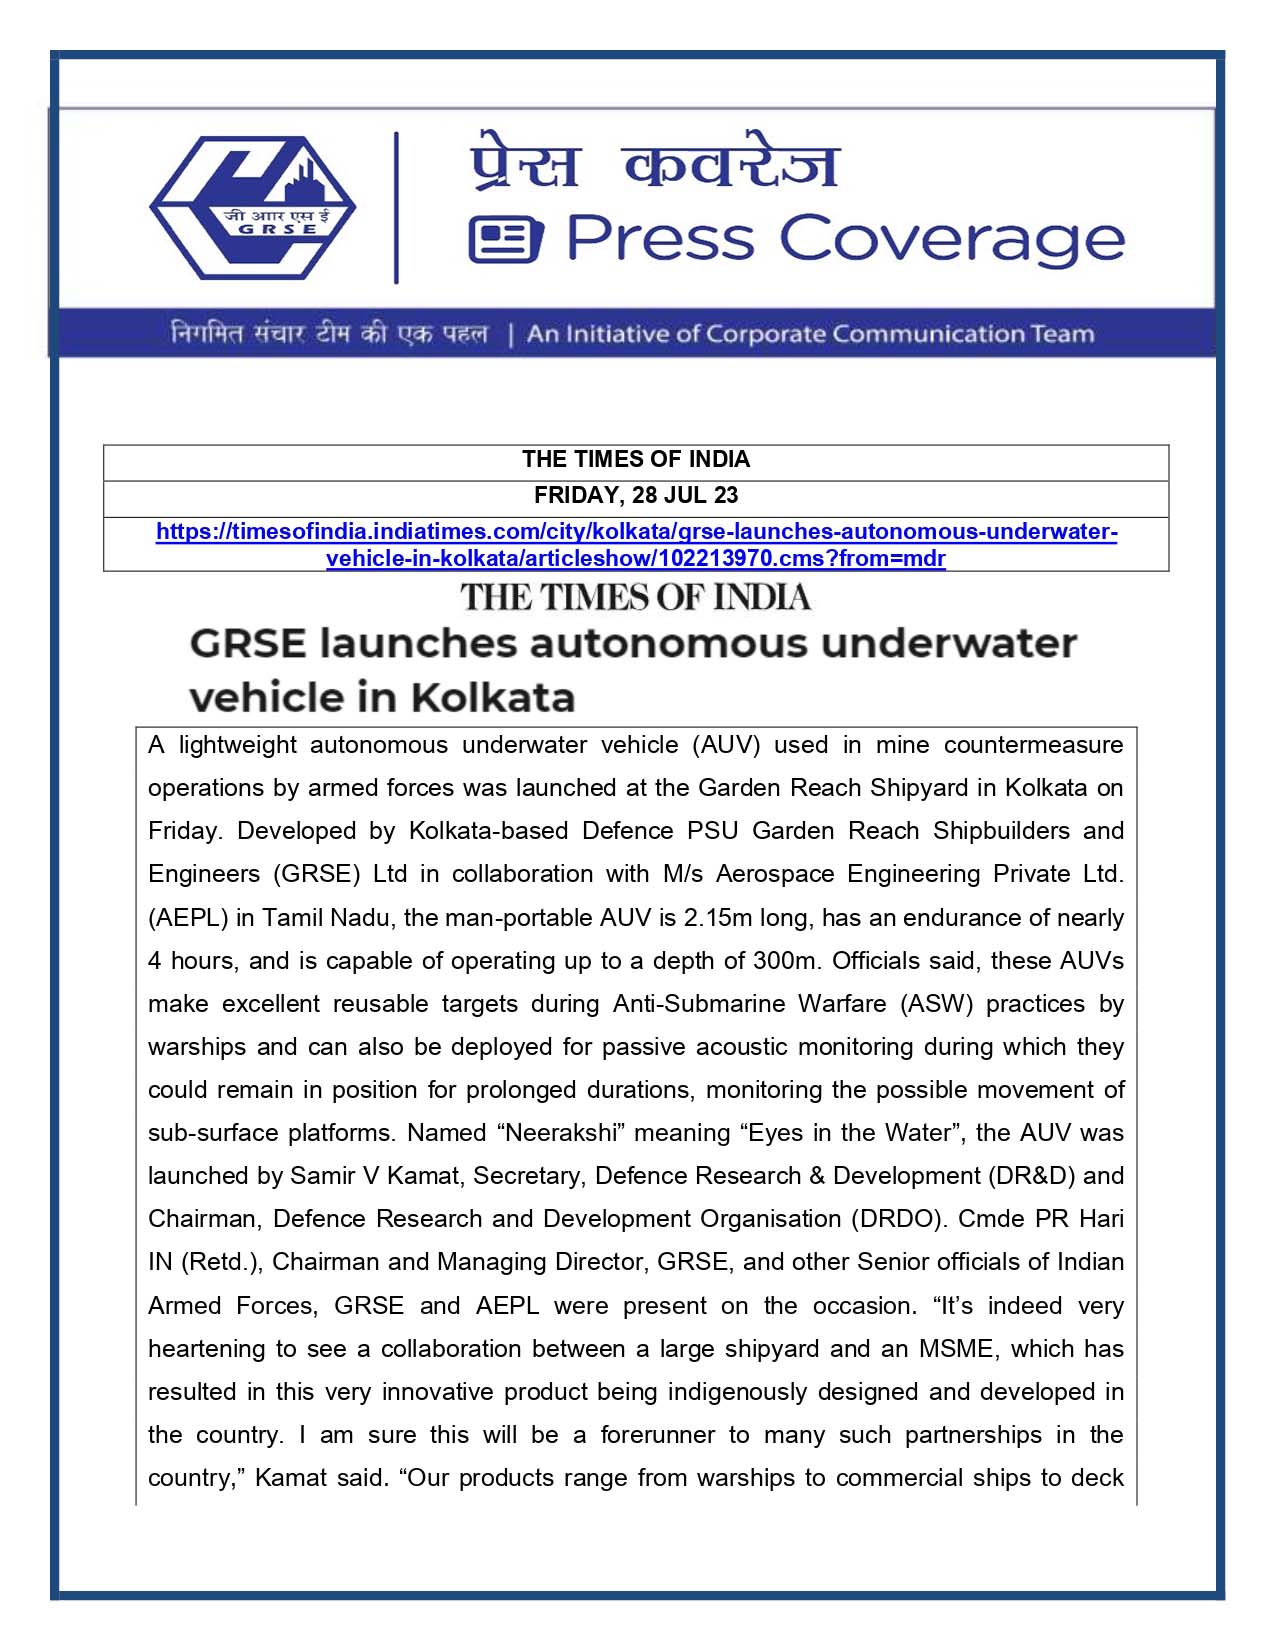 Press Coverage : The Times of India, 28 Jul 23 : GRSE Launches Autonomous Underwater Vehicle in Kolkata